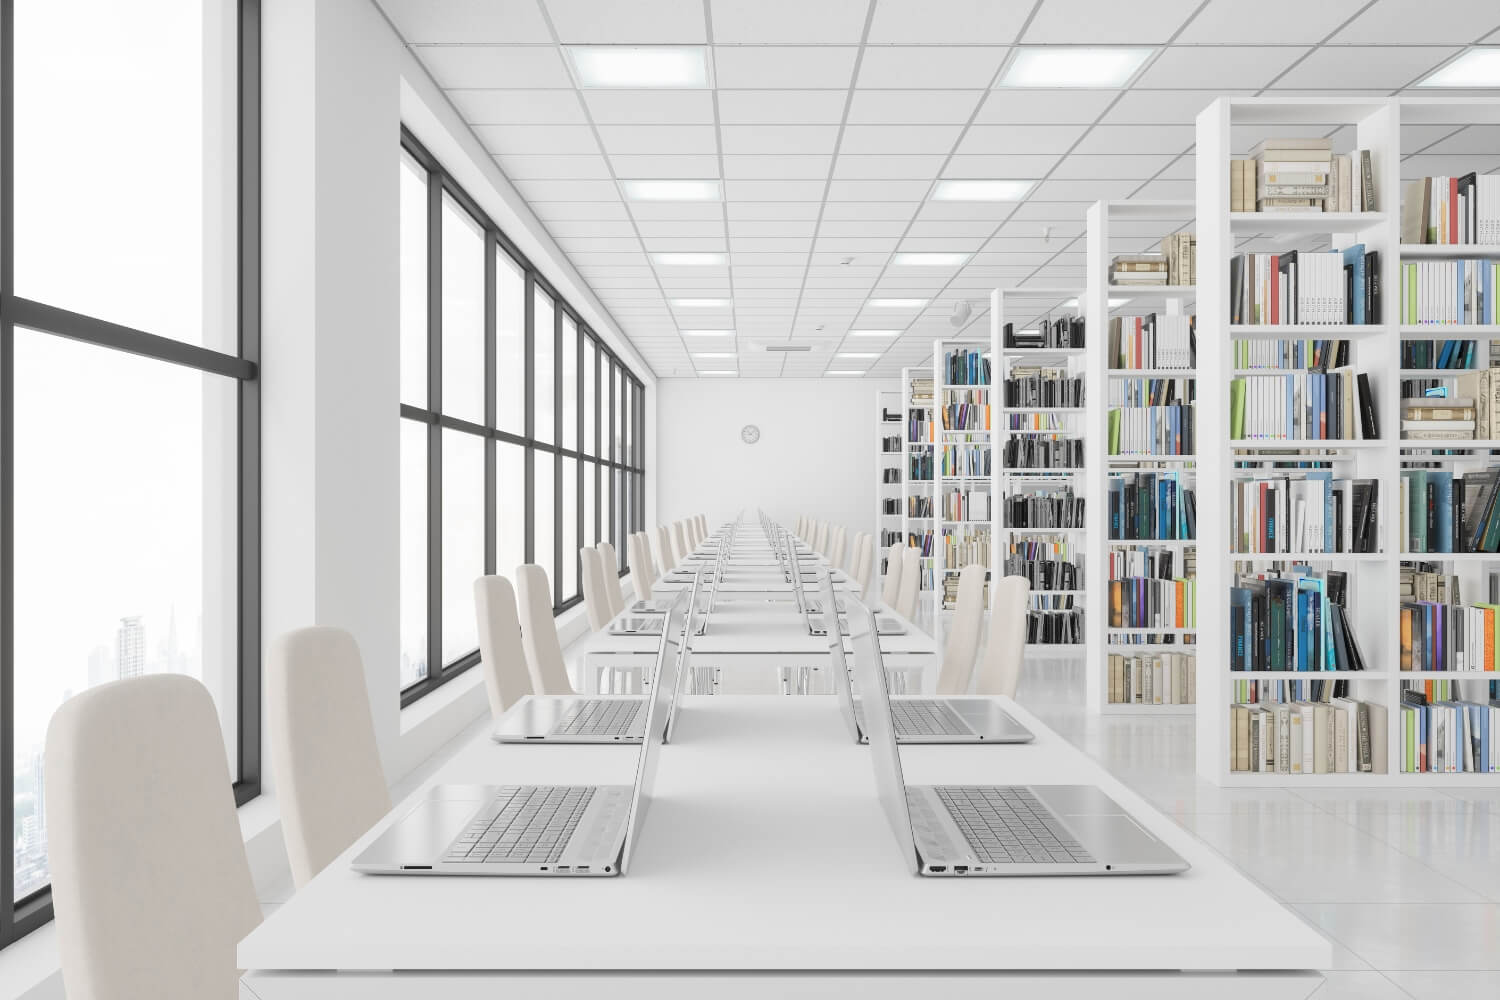 Prioritising Internal Air Quality in Australia Blog Cover Image. It also shows white, clean, minimalist library space.